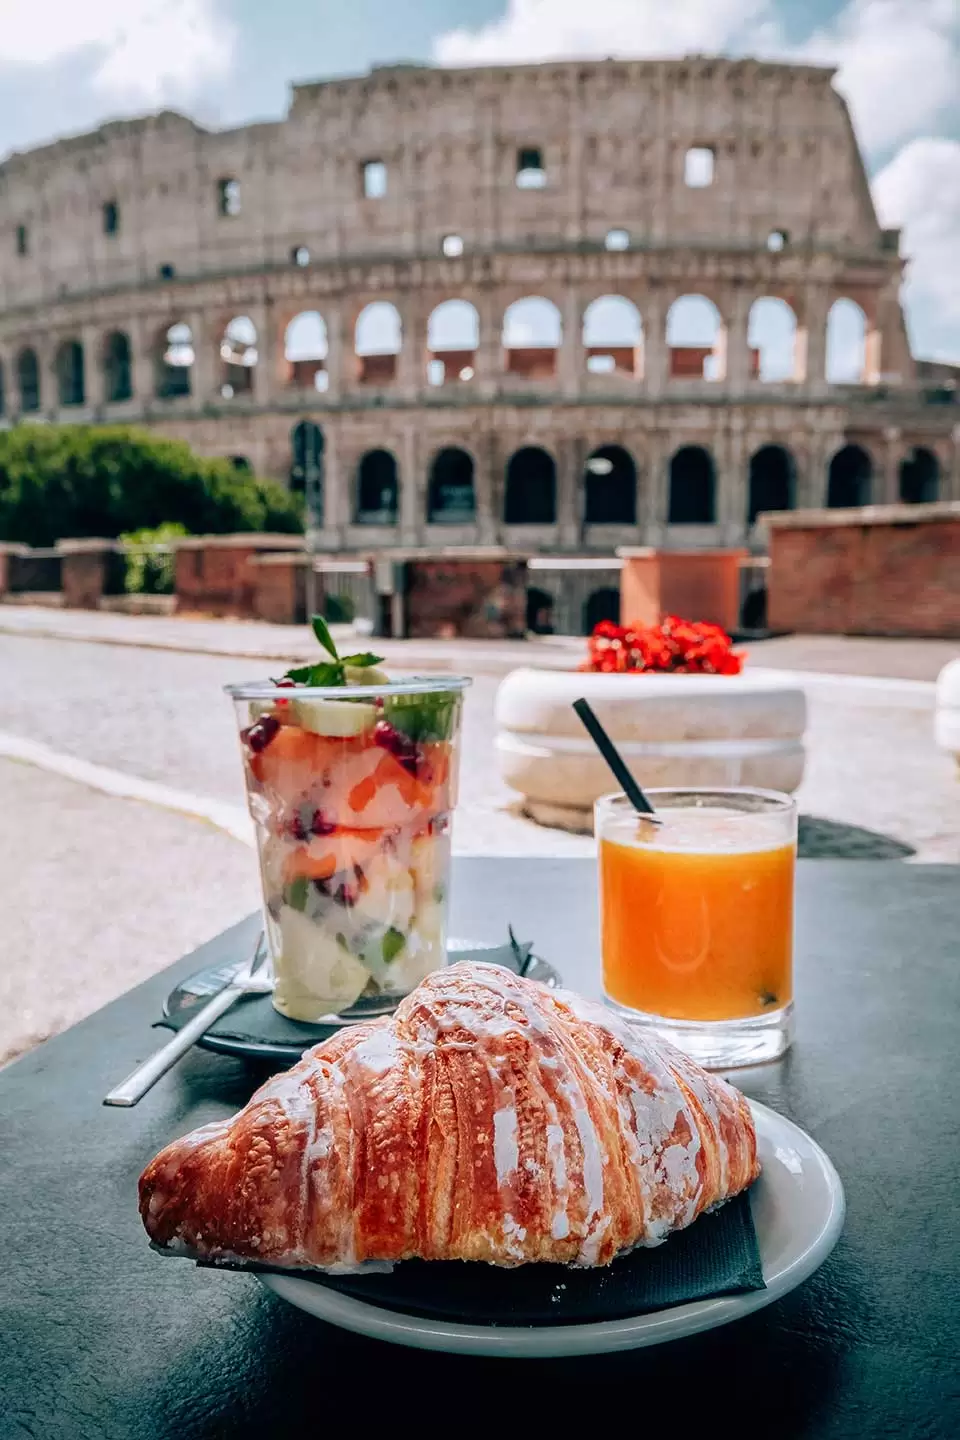 Hotels Near the Colosseum in Rome - Breakfast in front of Colosseum